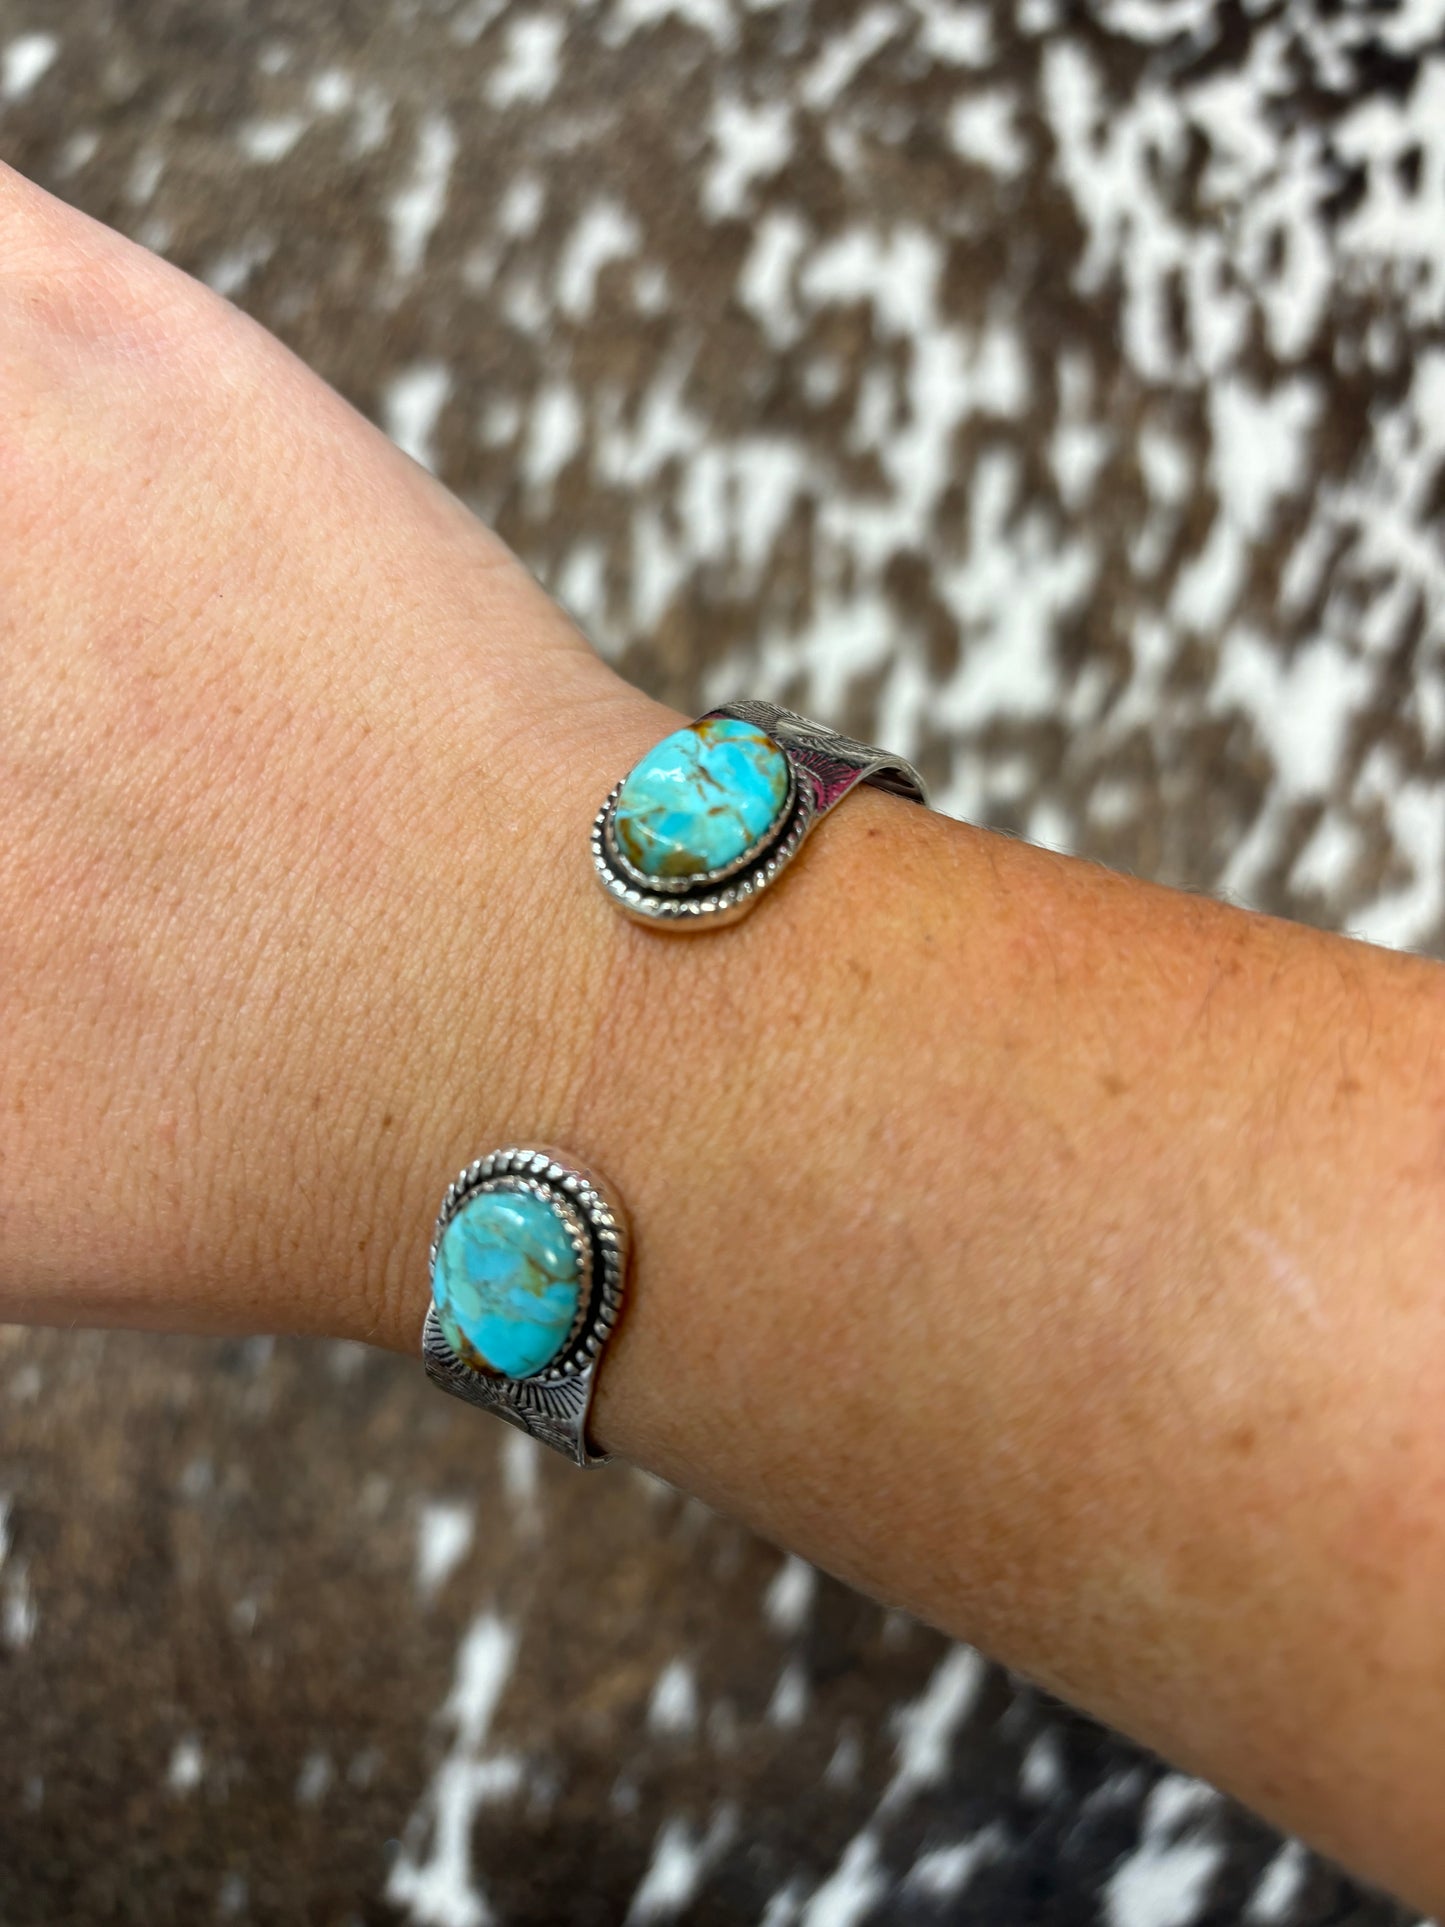 The Double Trouble Kingman Turquoise Cuff